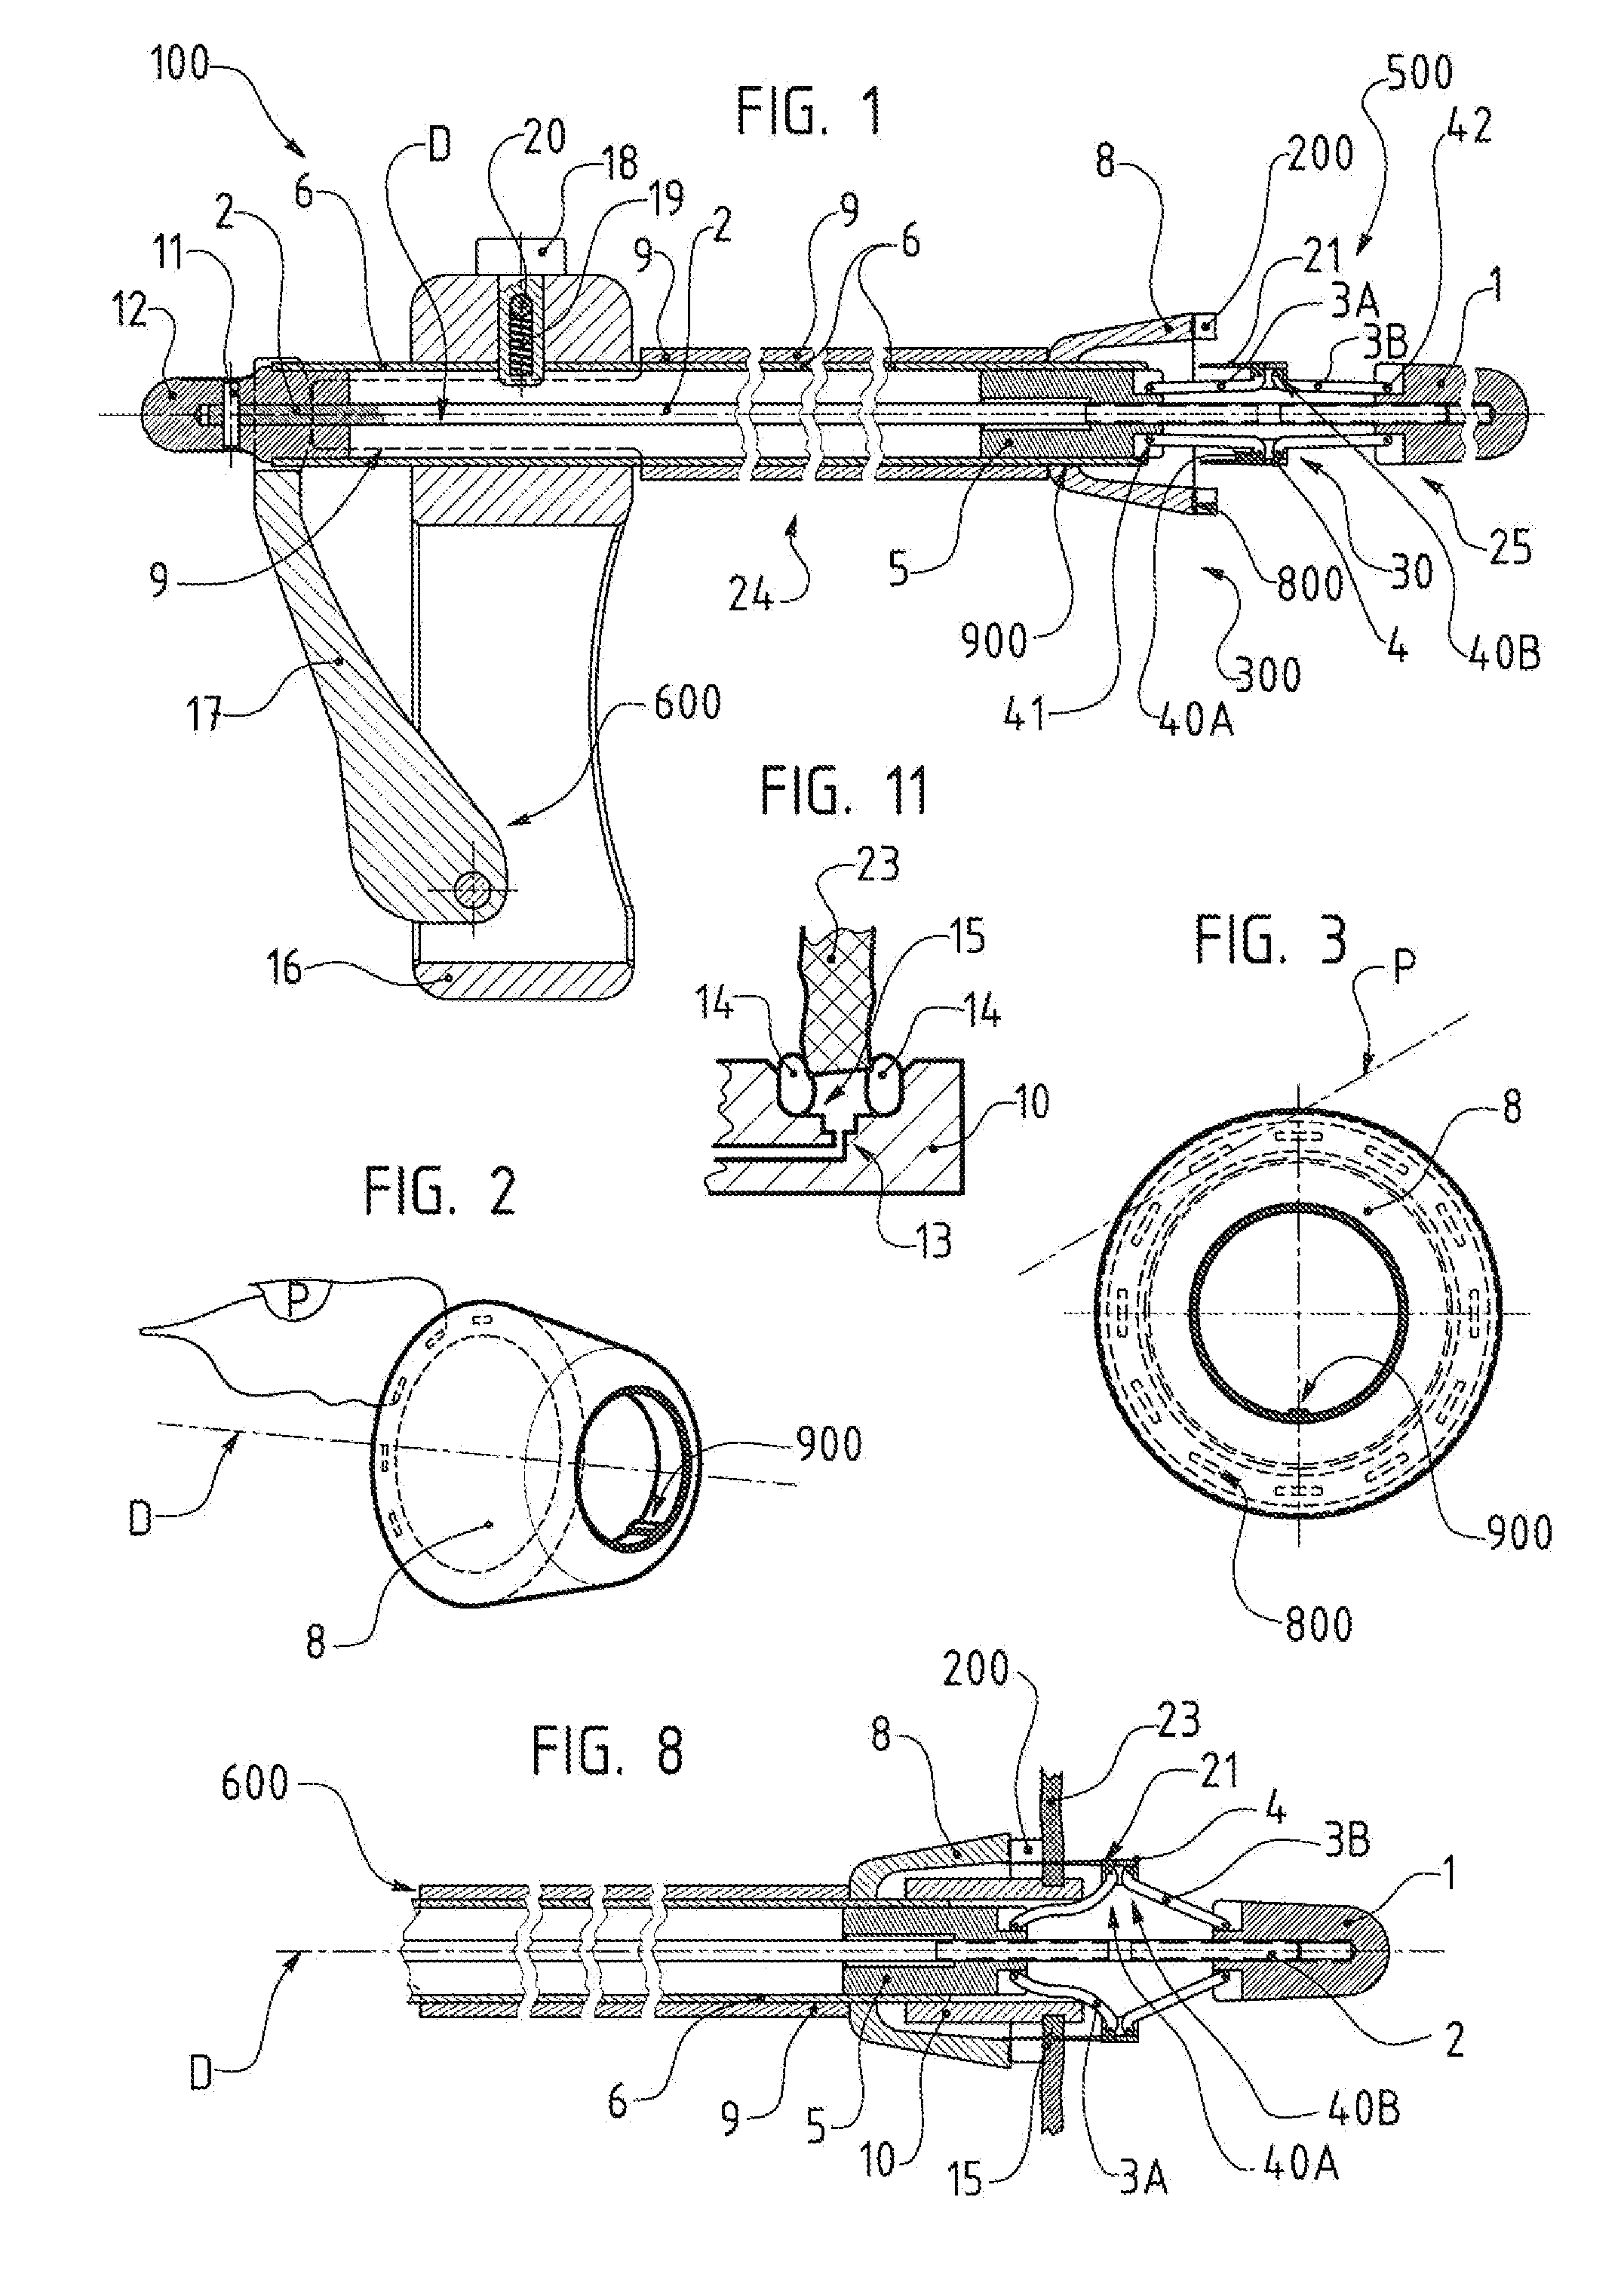 Automated insertion device for heart valve prosthesis